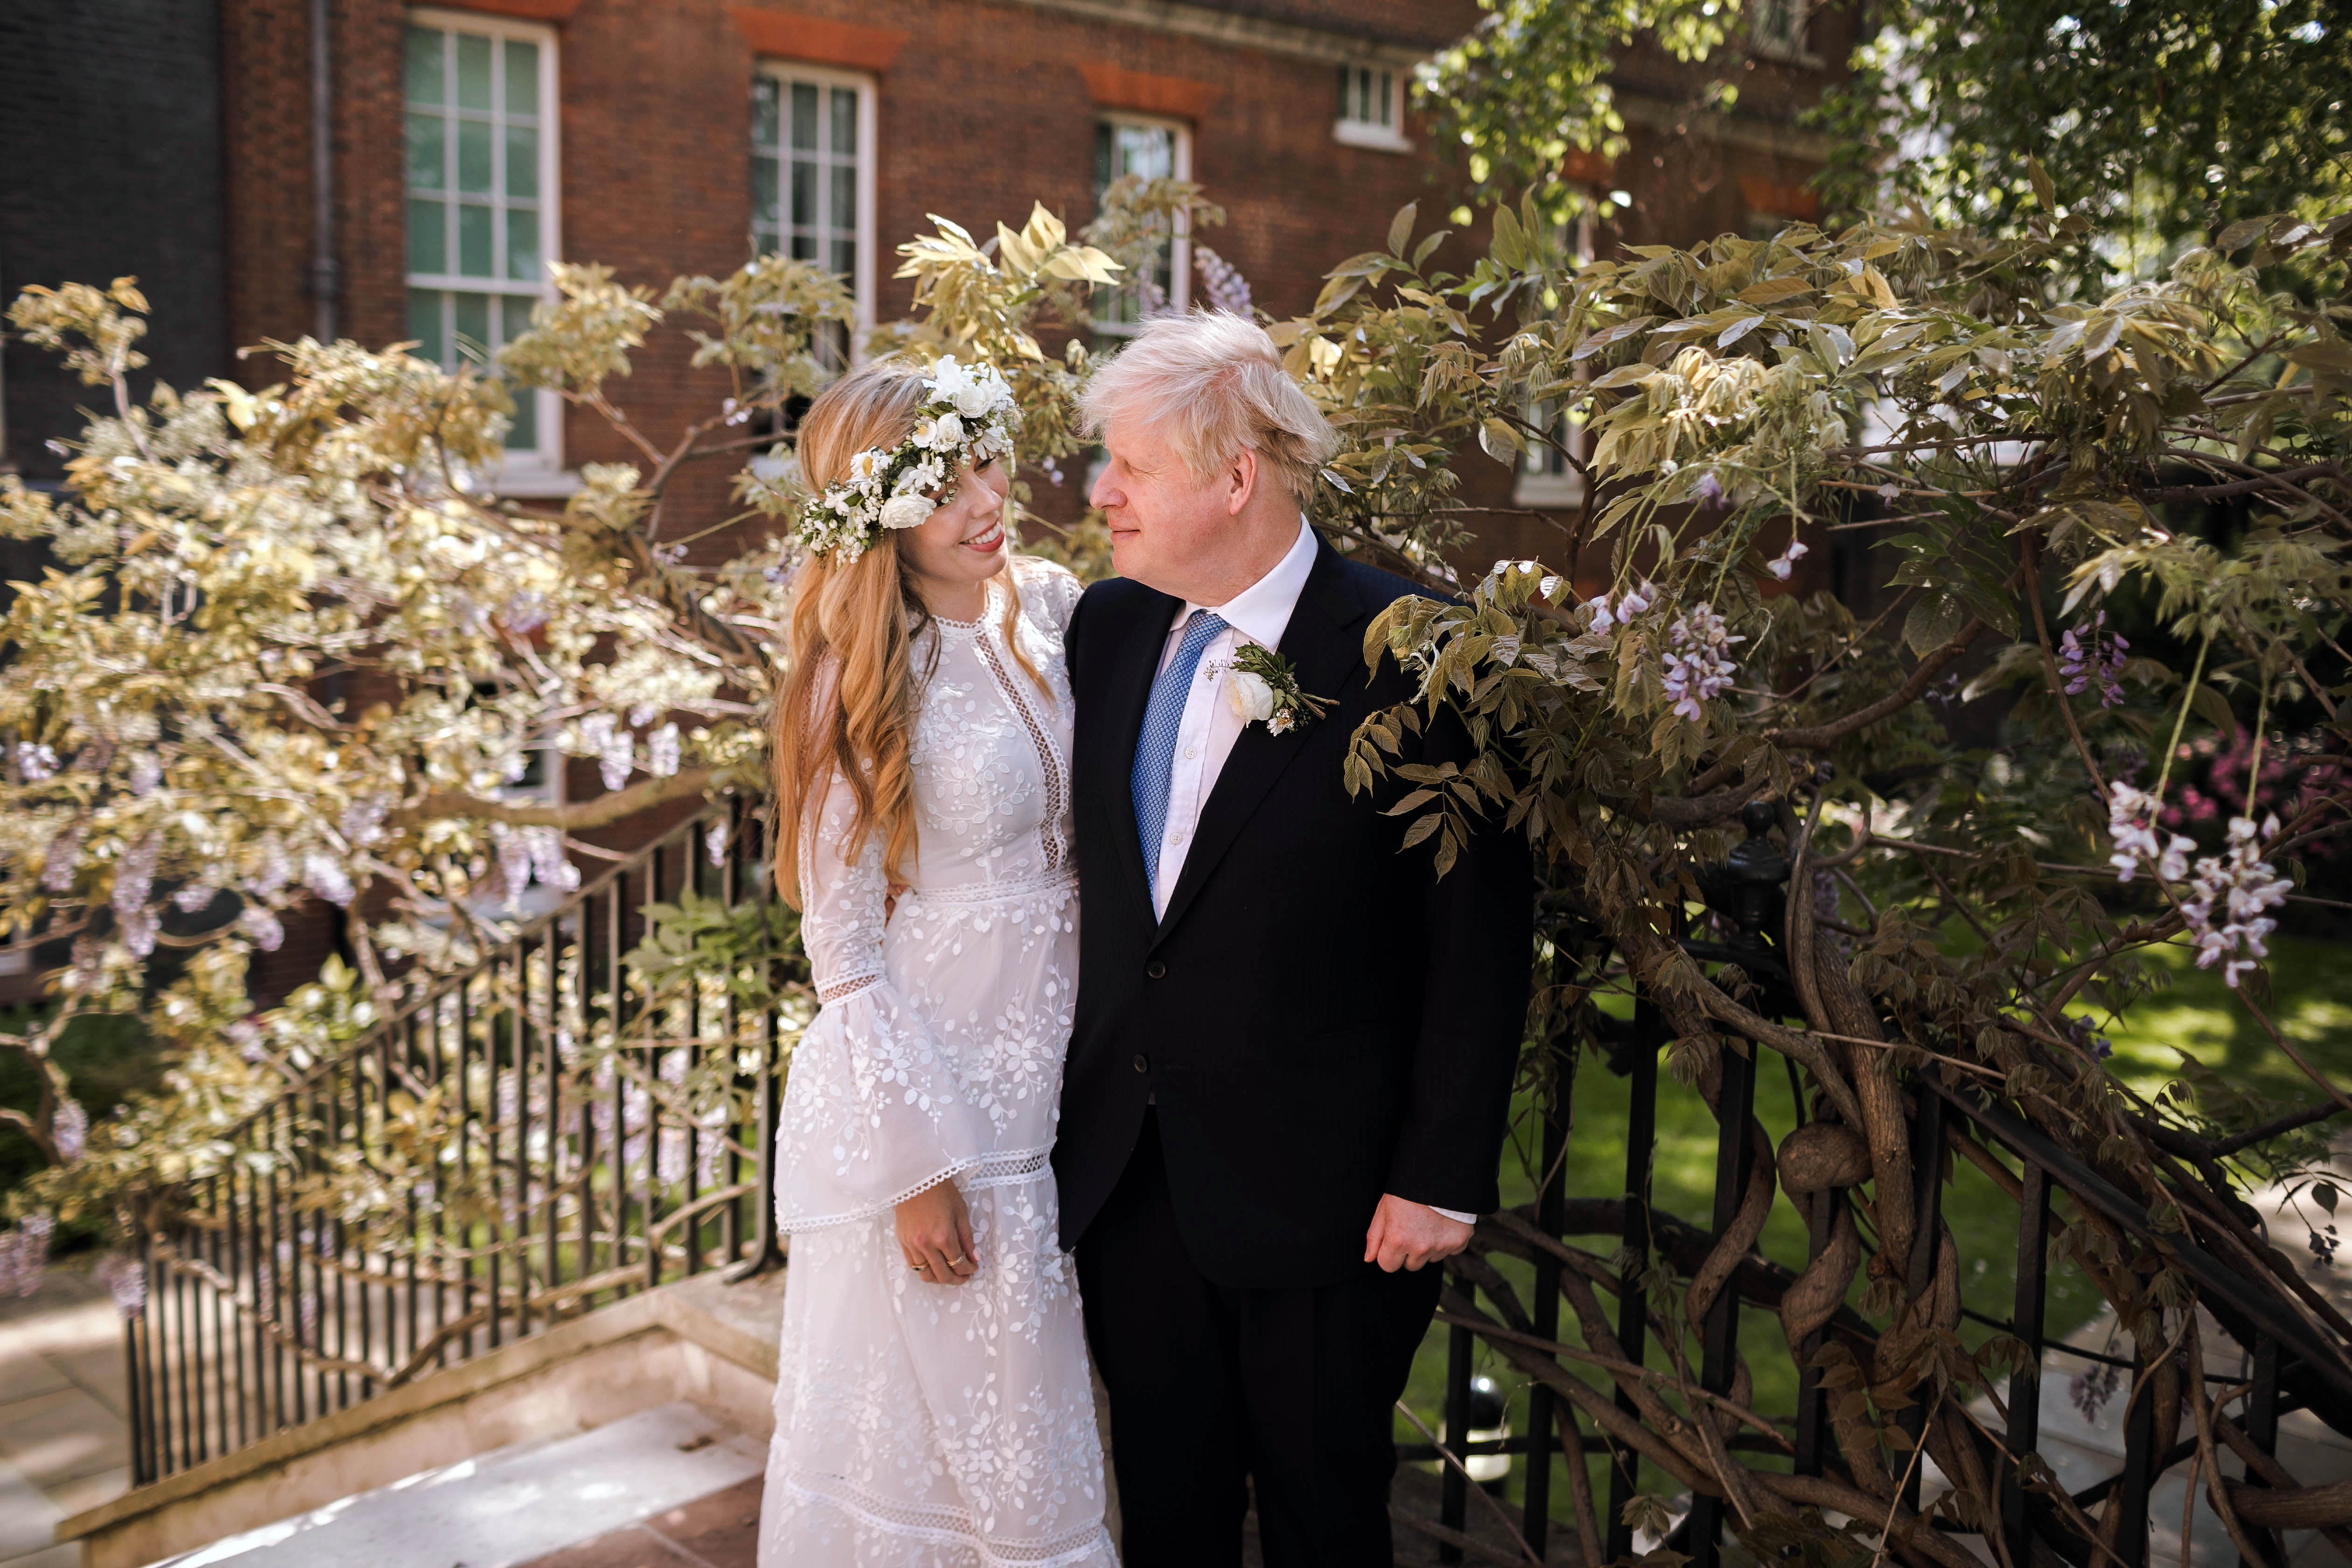 Boris Johnson and wife Carrie on their wedding day